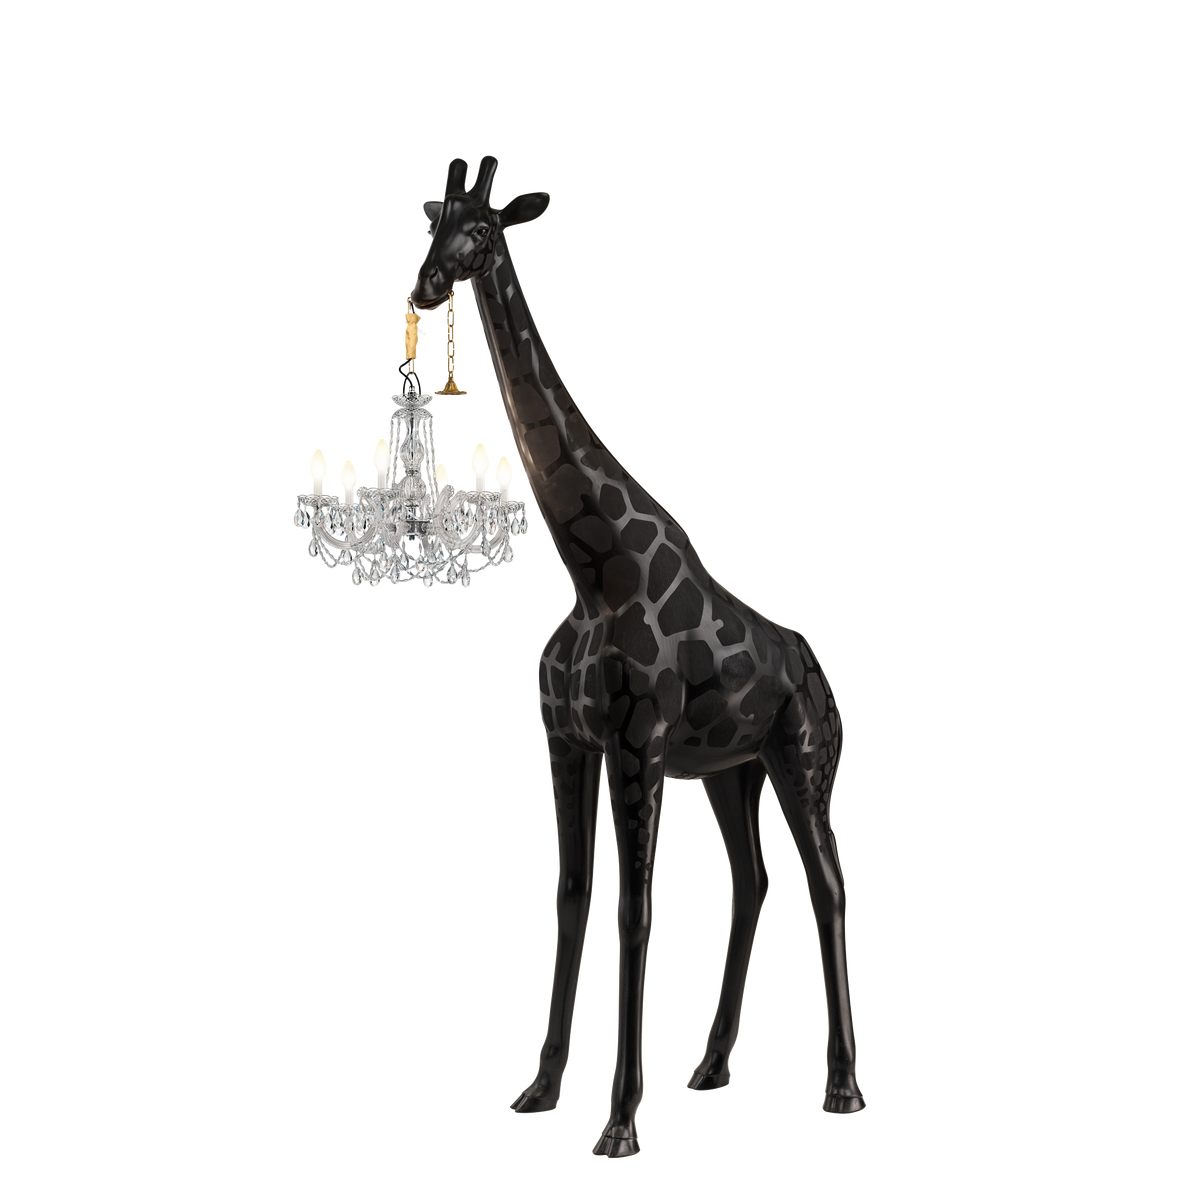 Designed by Marcantonio, Giraffe in Love M is a giraffe with a height of 2.65 meters, which holds a classic Marie-Thérèse style chandelier, completely waterproof and having an IP65 certificate. Brave and elegant, naturally will be in the center of attention of every space in which it will be found, both inside and outside.